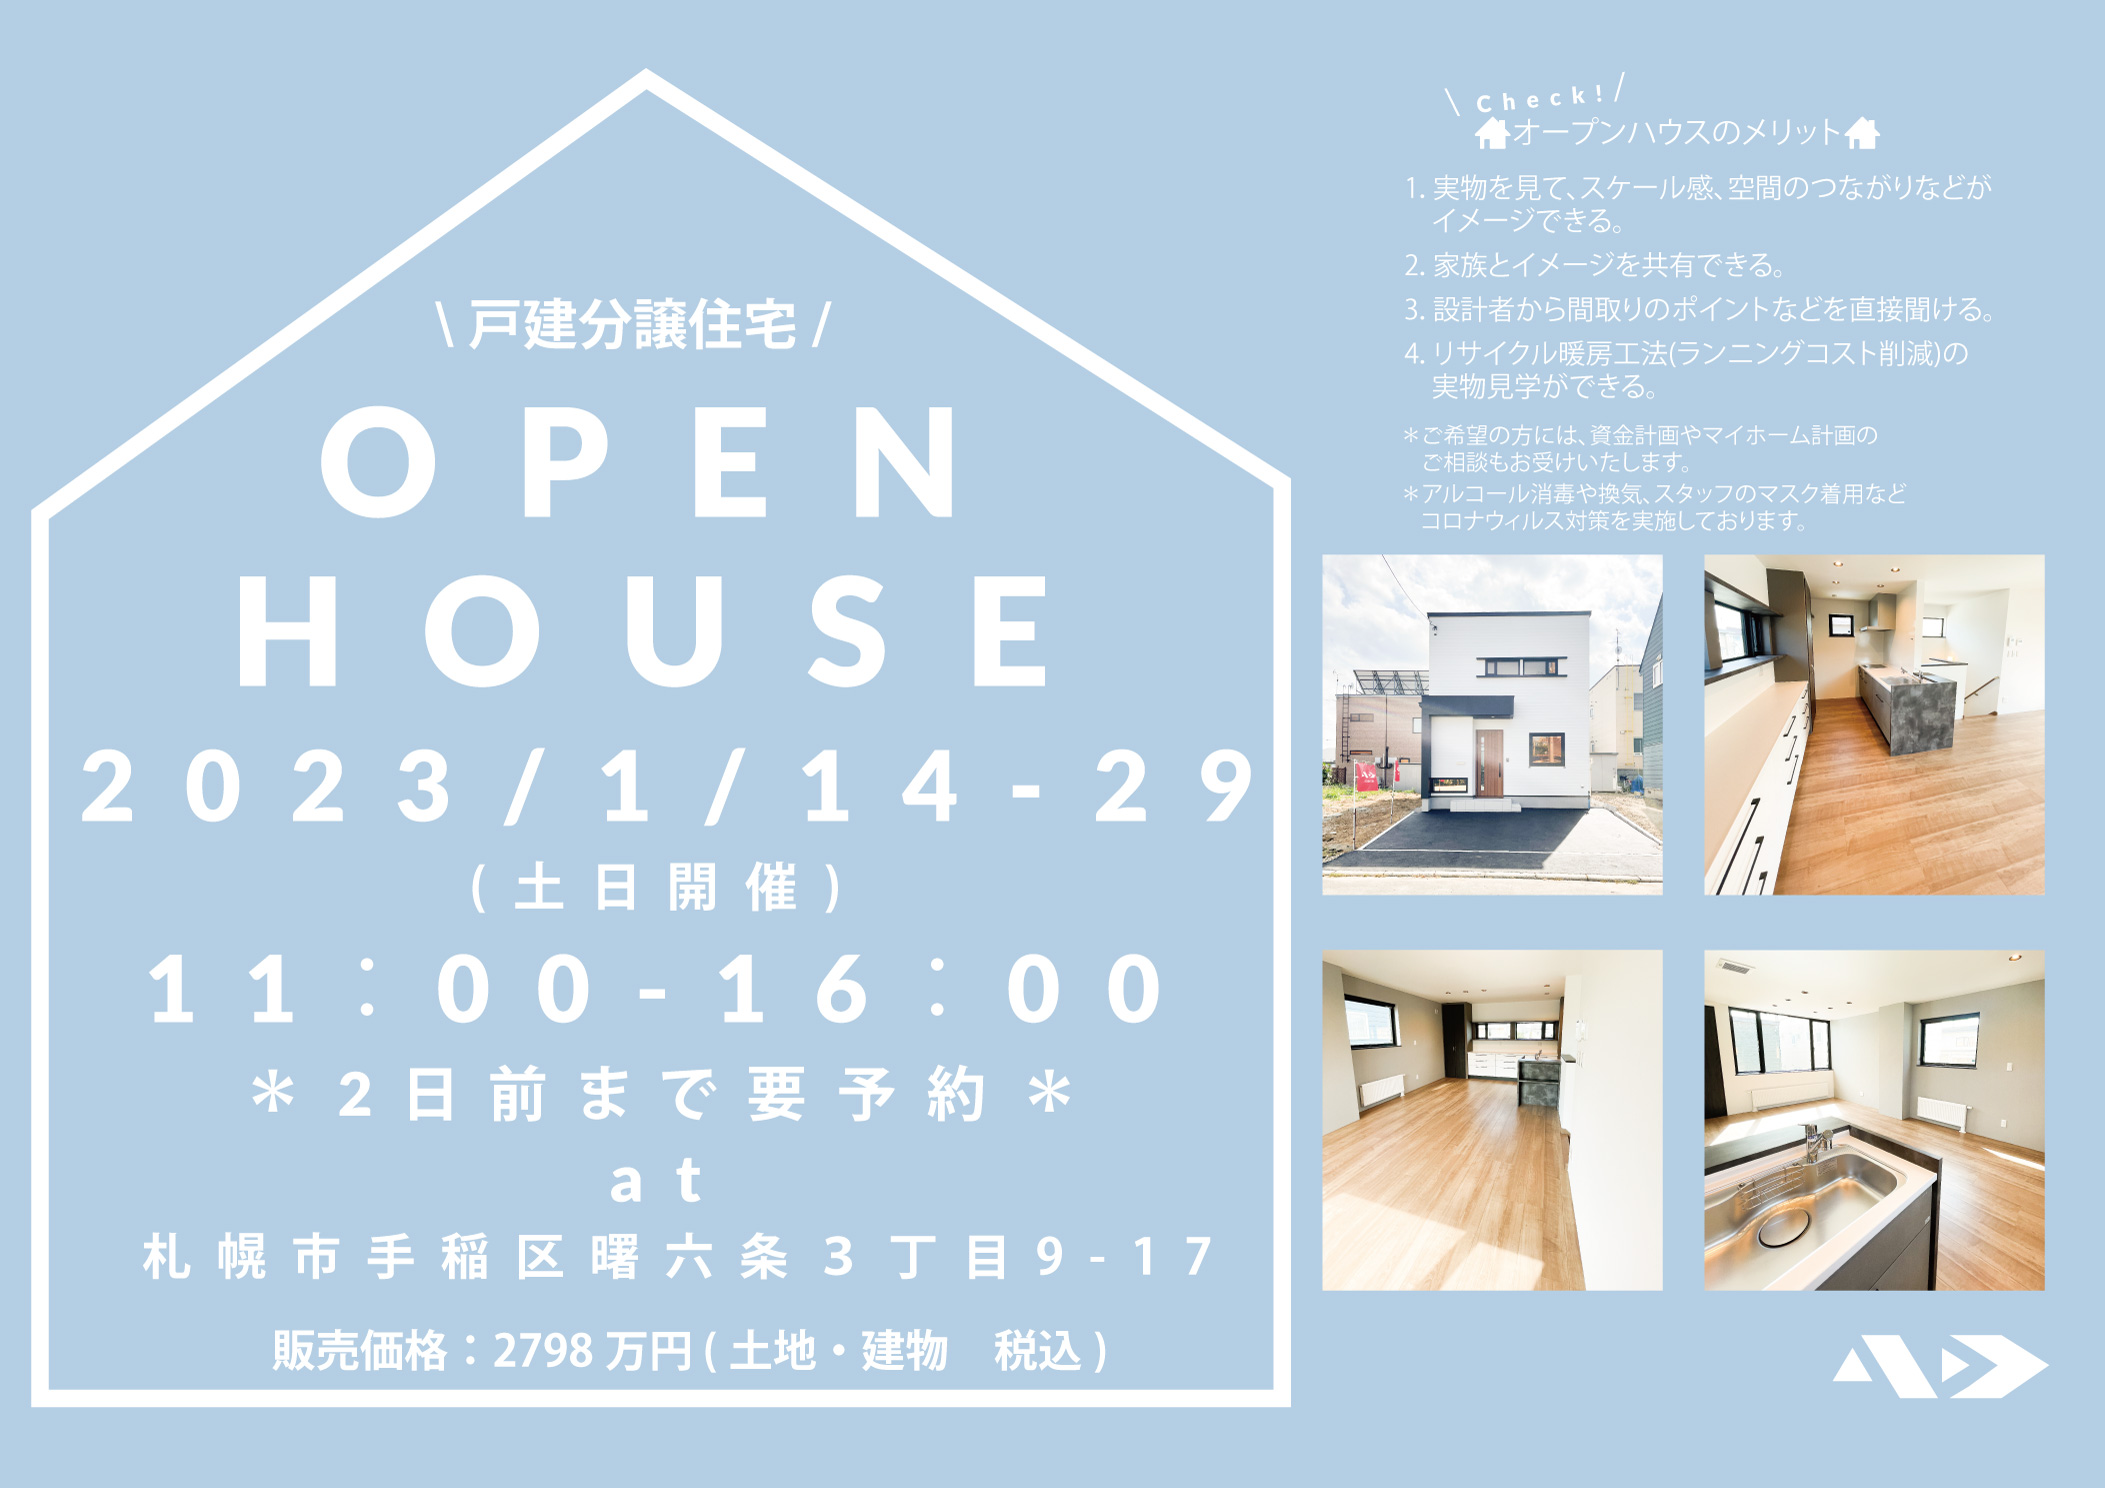 OPEN HOUSE  at 手稲区曙6条3丁目